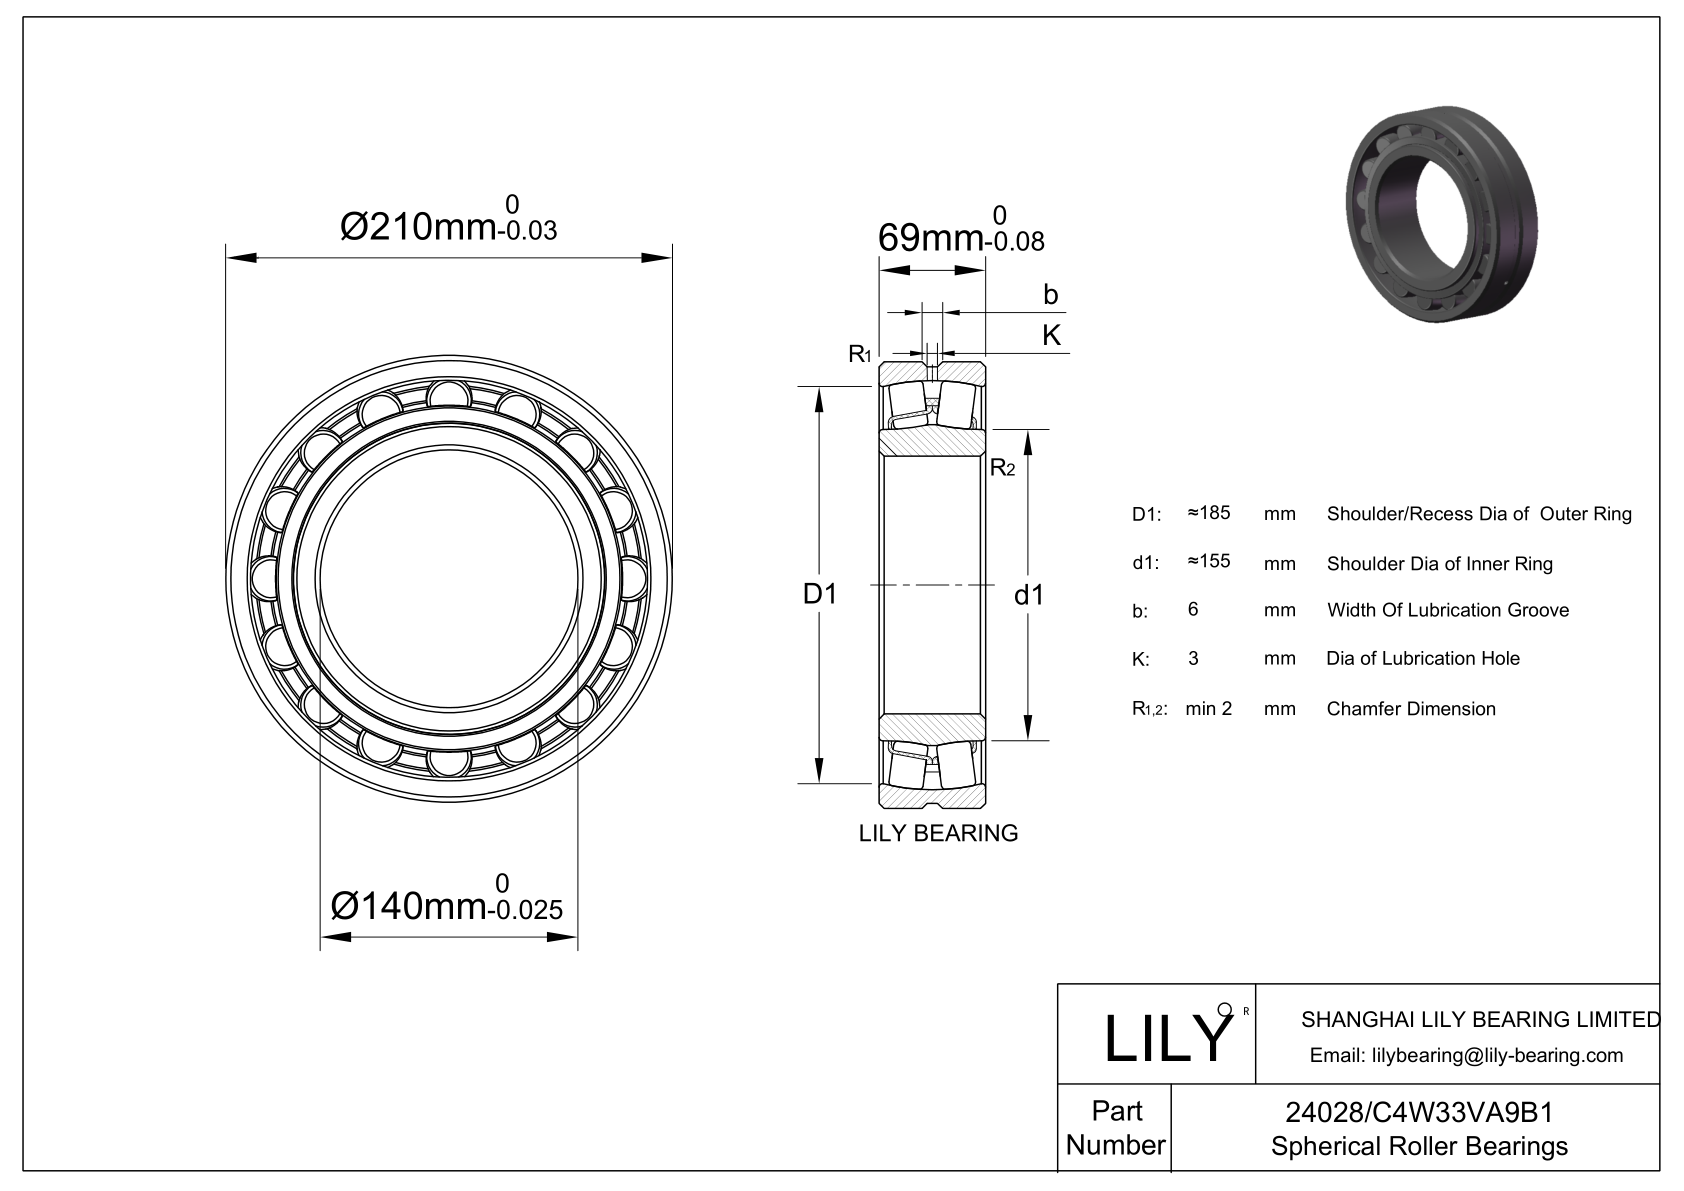 24028/C4W33VA9B1 Double Row Spherical Roller Bearing cad drawing